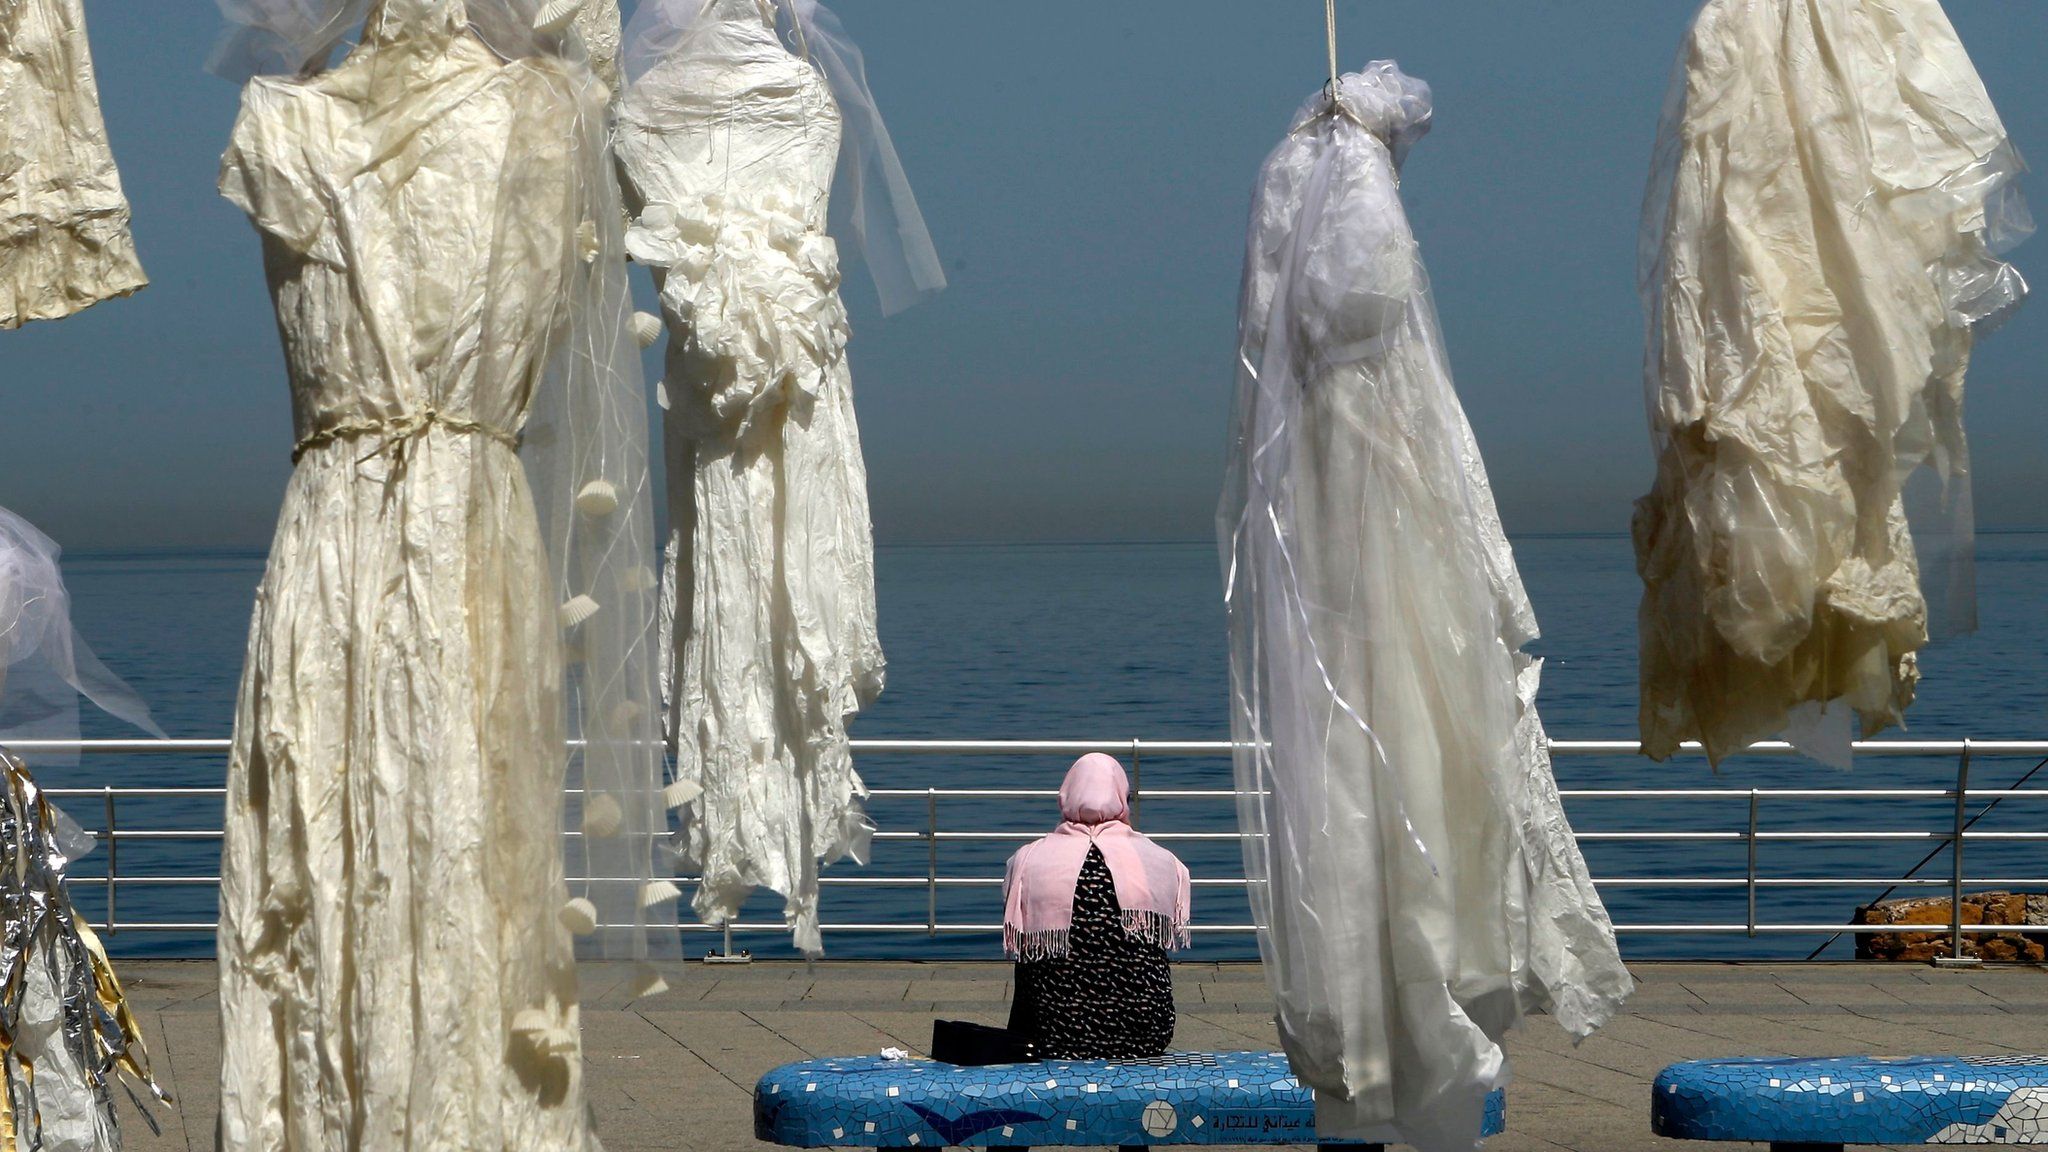 wedding dresses hang in Beirut seafront